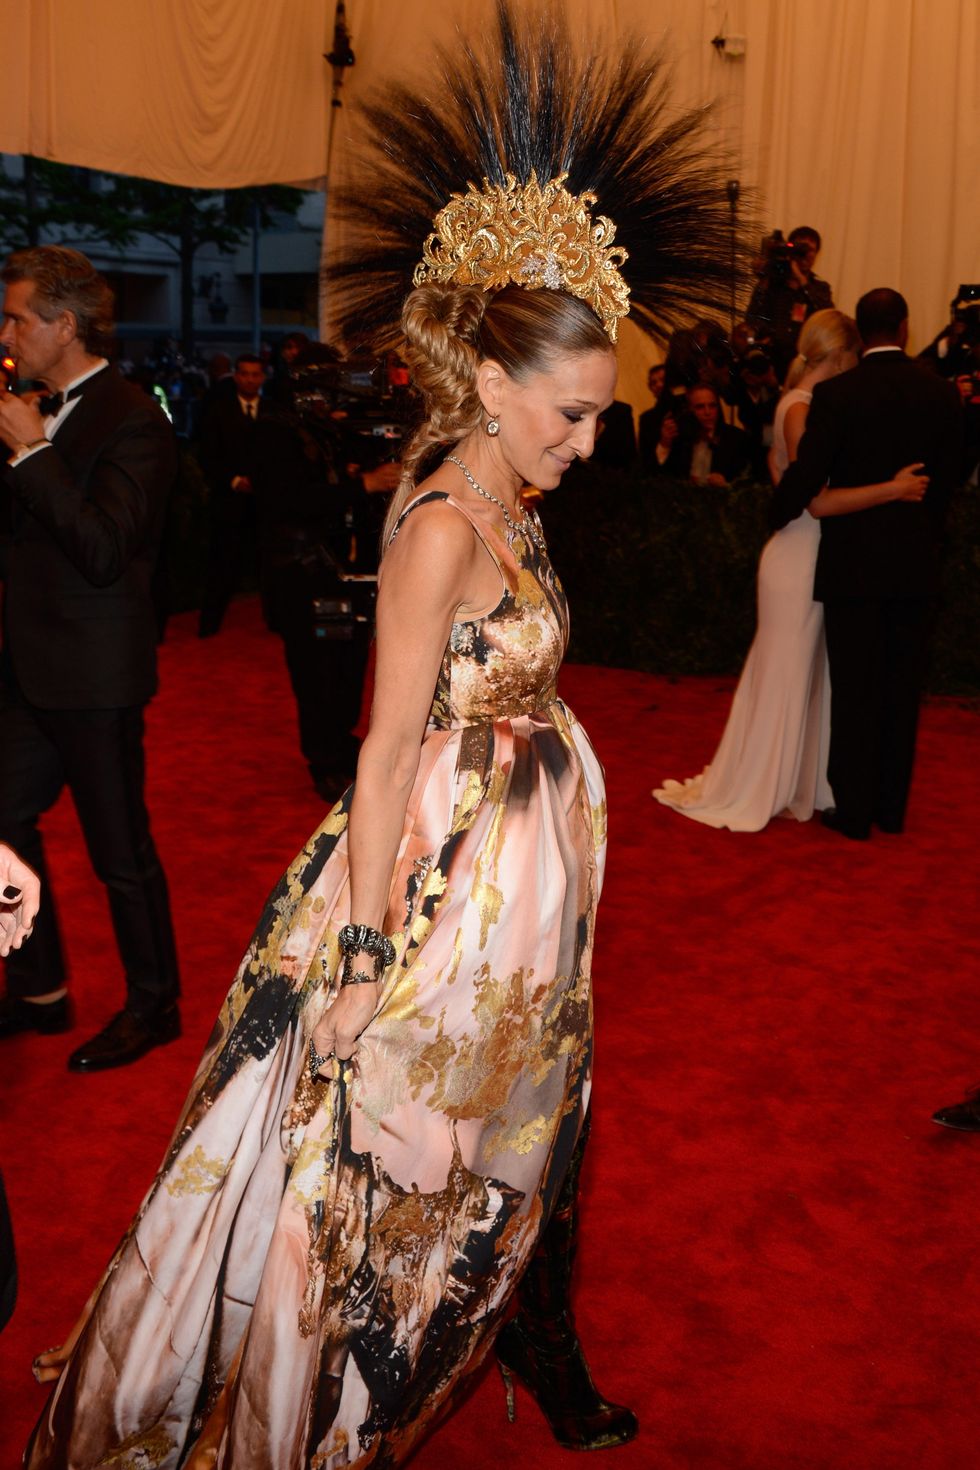 42 Craziest Met Gala Dresses of All Time - Outrageous Met Gala Red